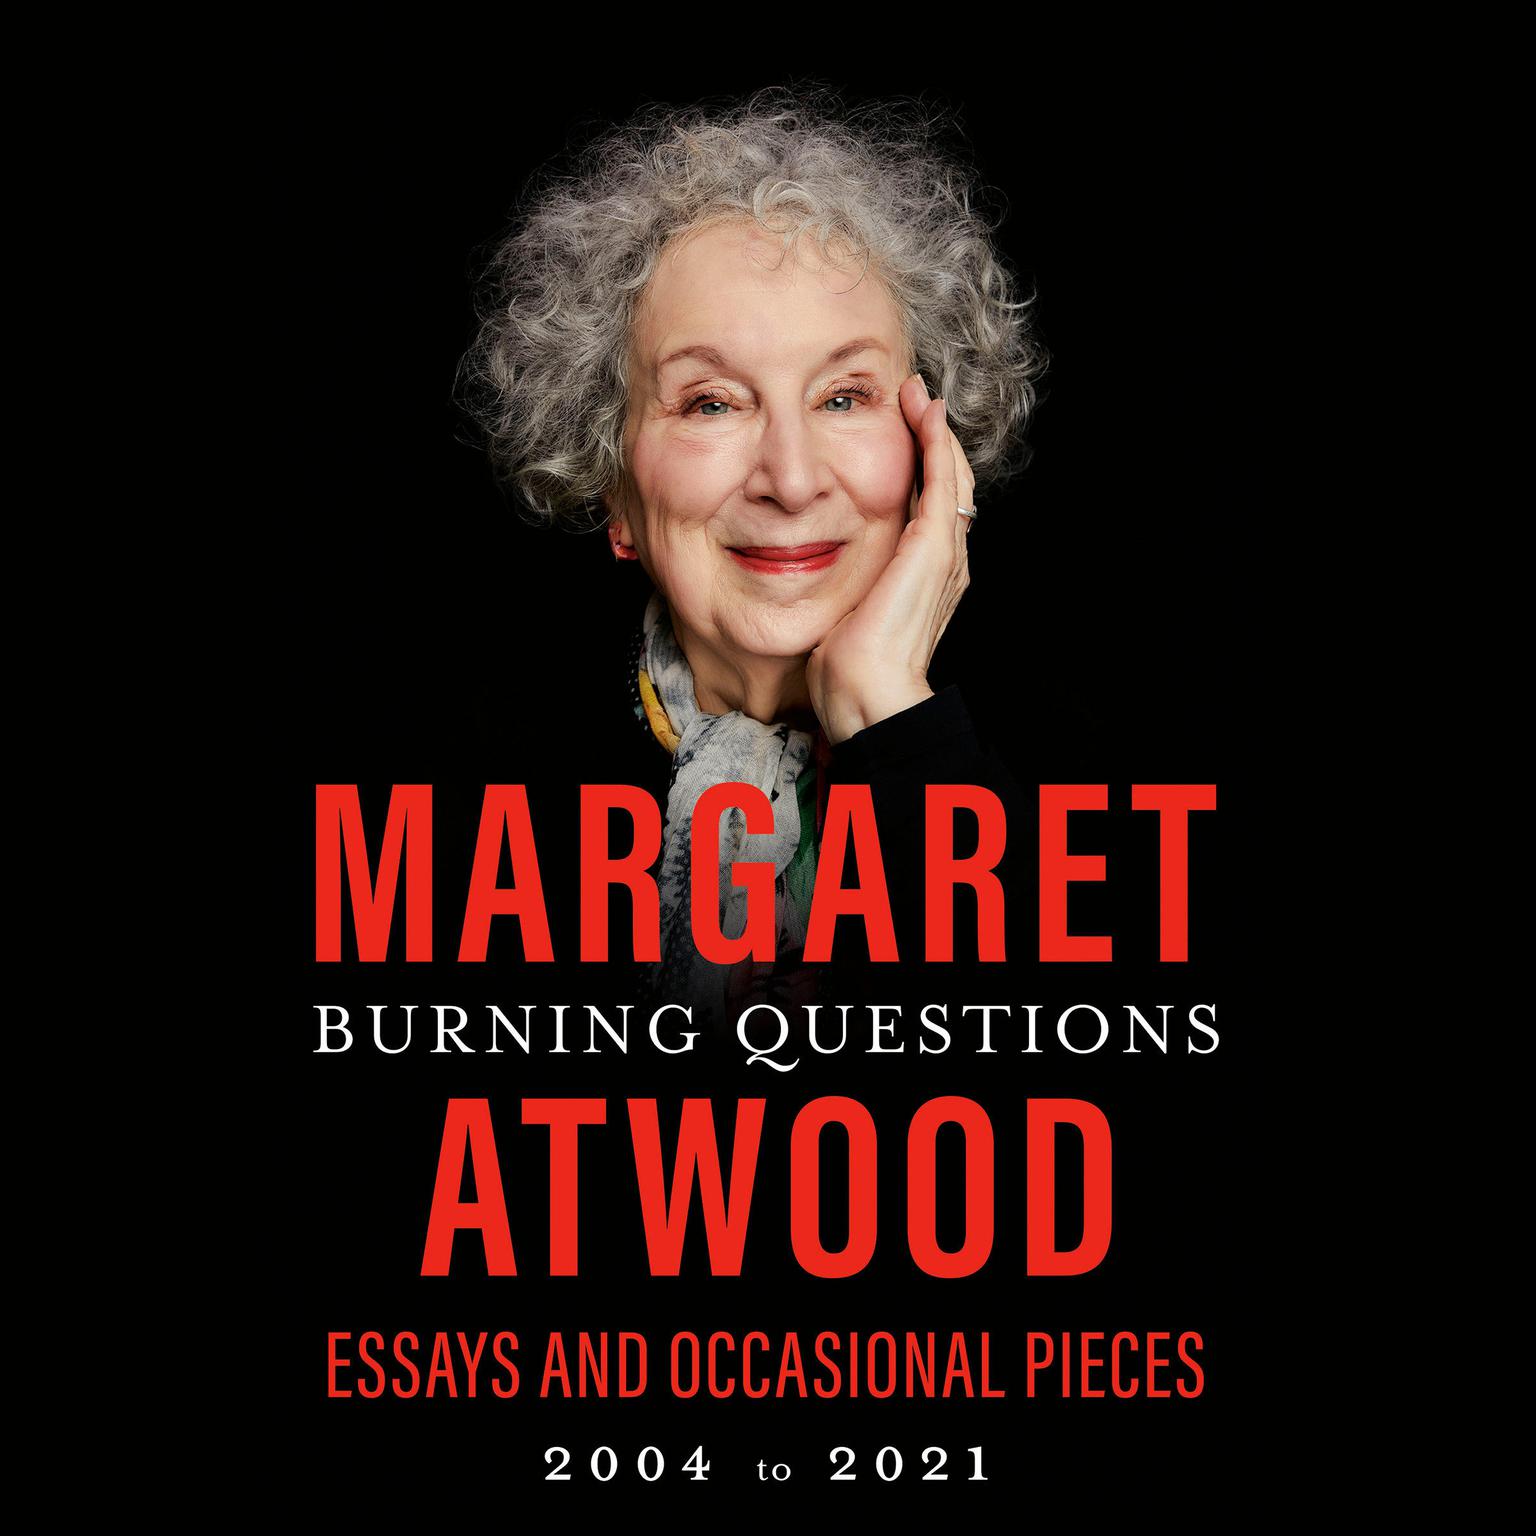 Burning Questions: Essays and Occasional Pieces, 2004 to 2021 Audiobook, by Margaret Atwood